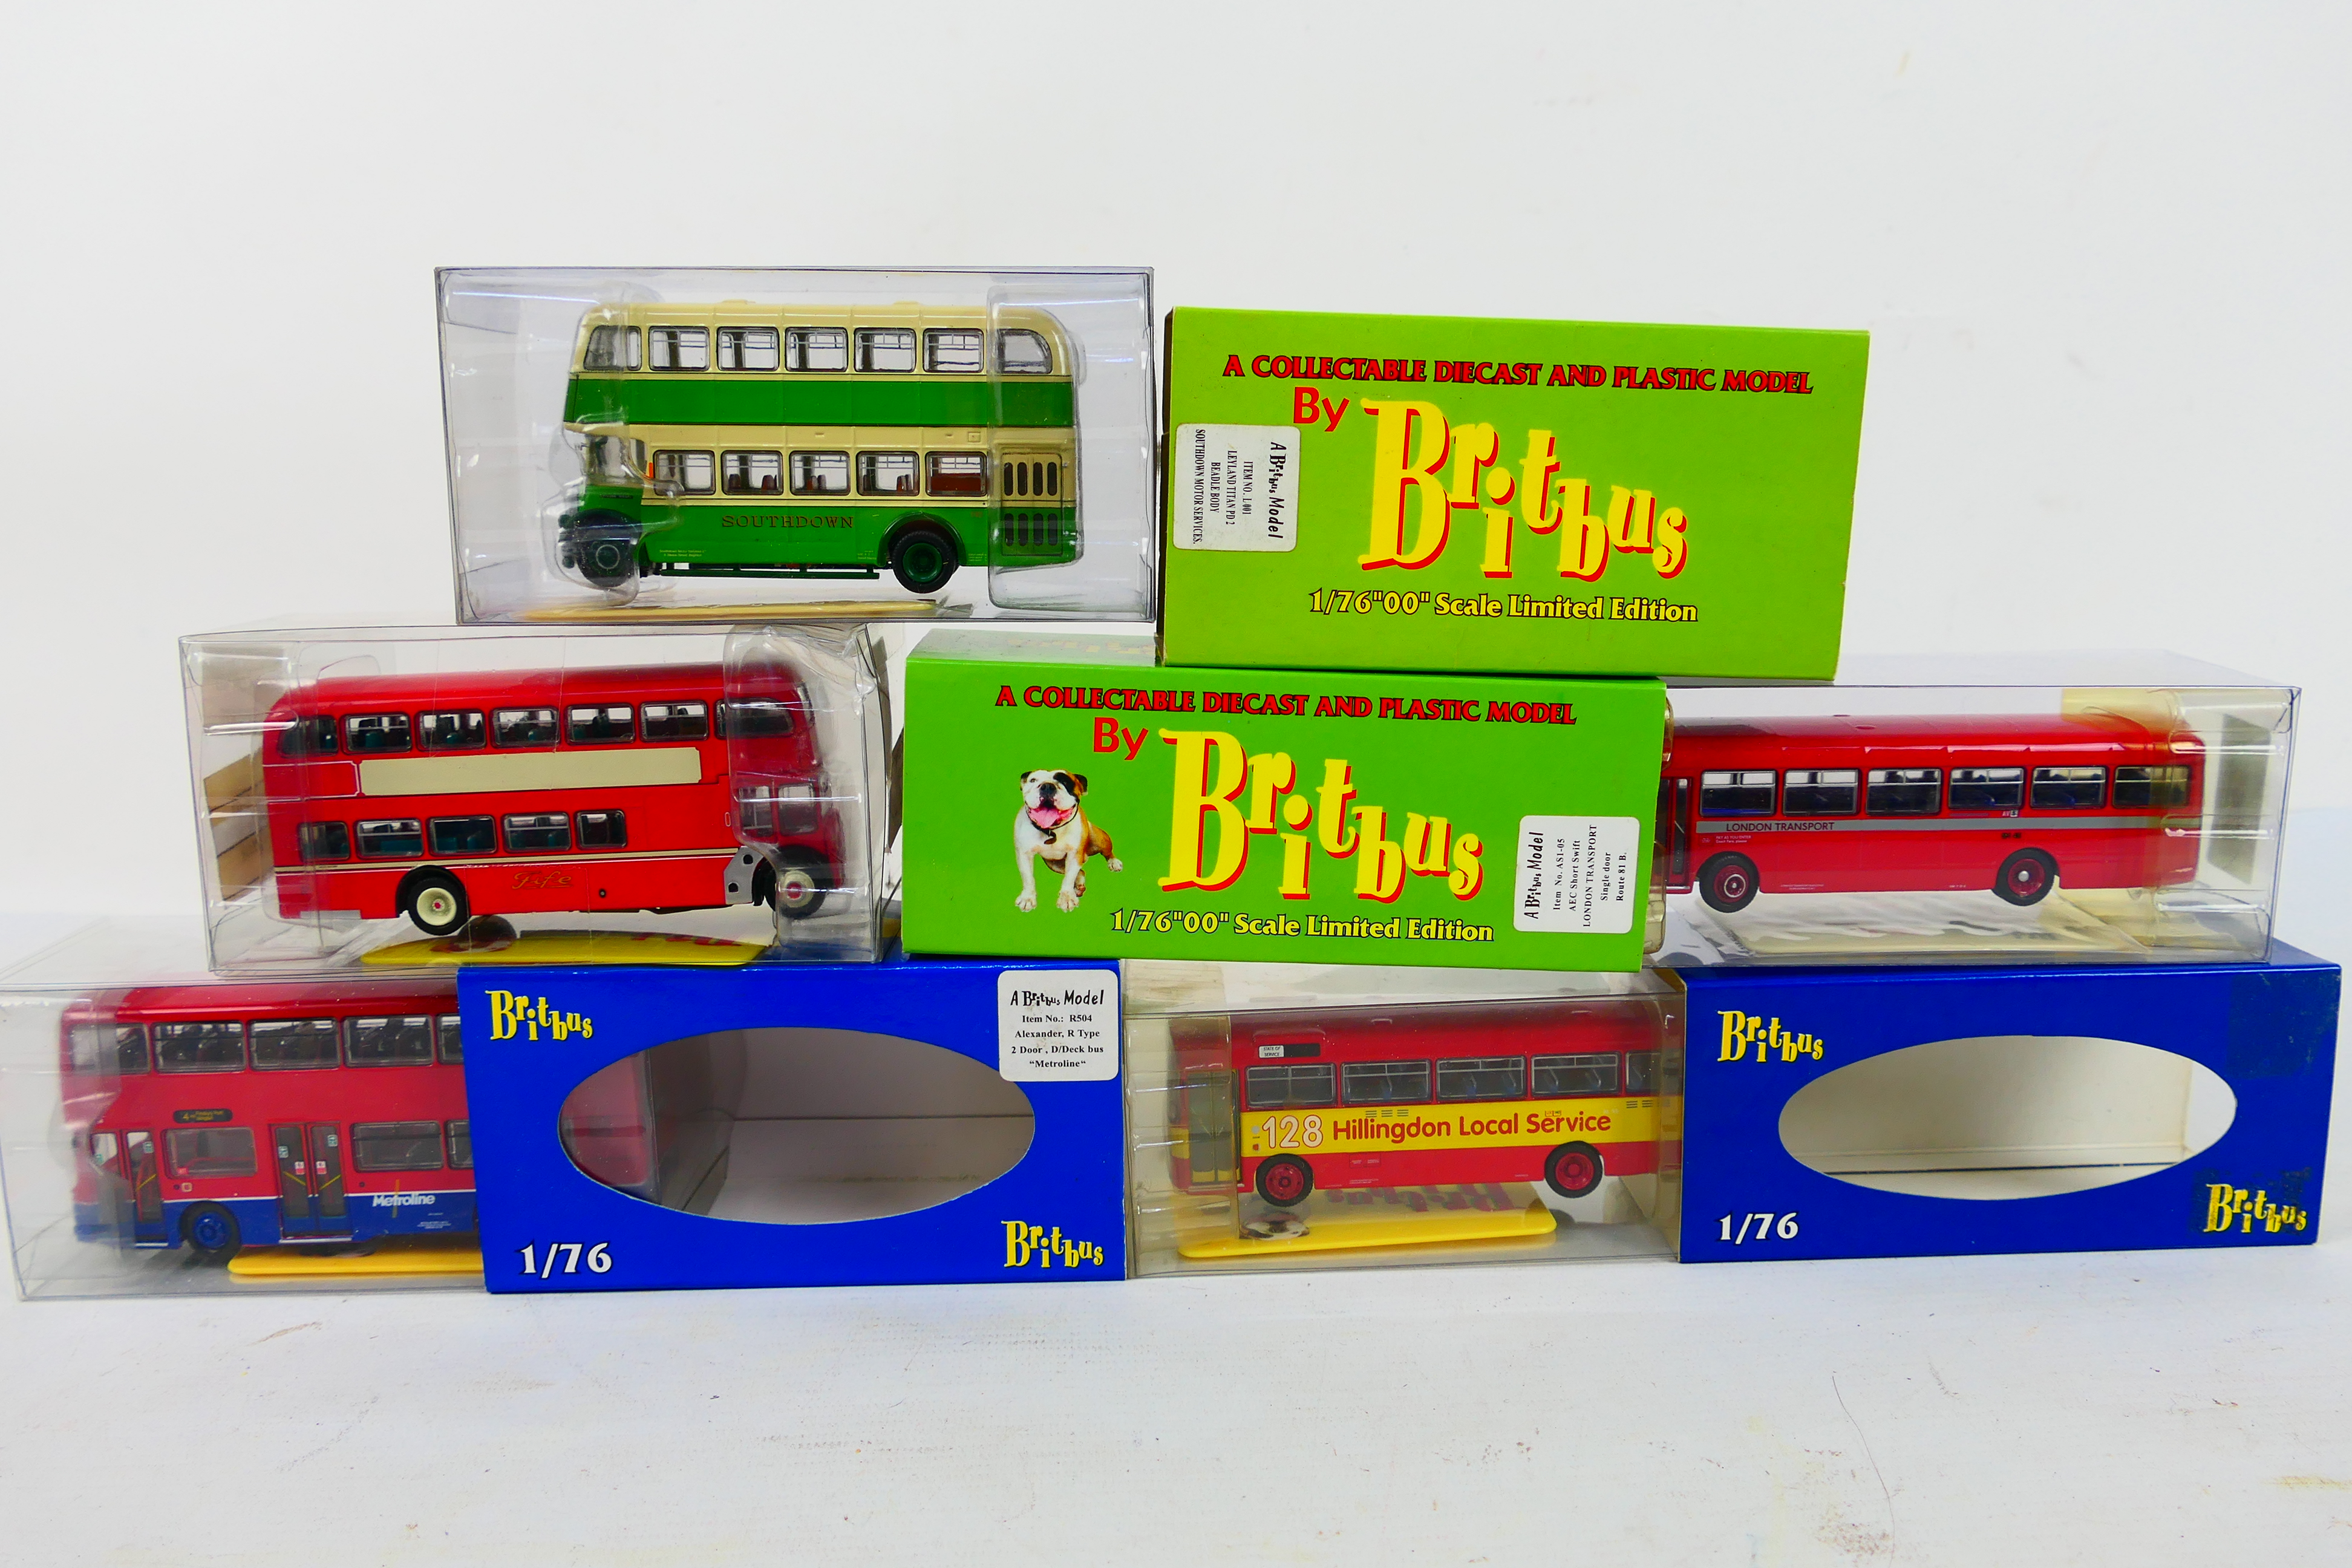 Britbus - 5 x boxed 1:76 limited edition die-cast model Britbus coaches and buses - Lot includes a